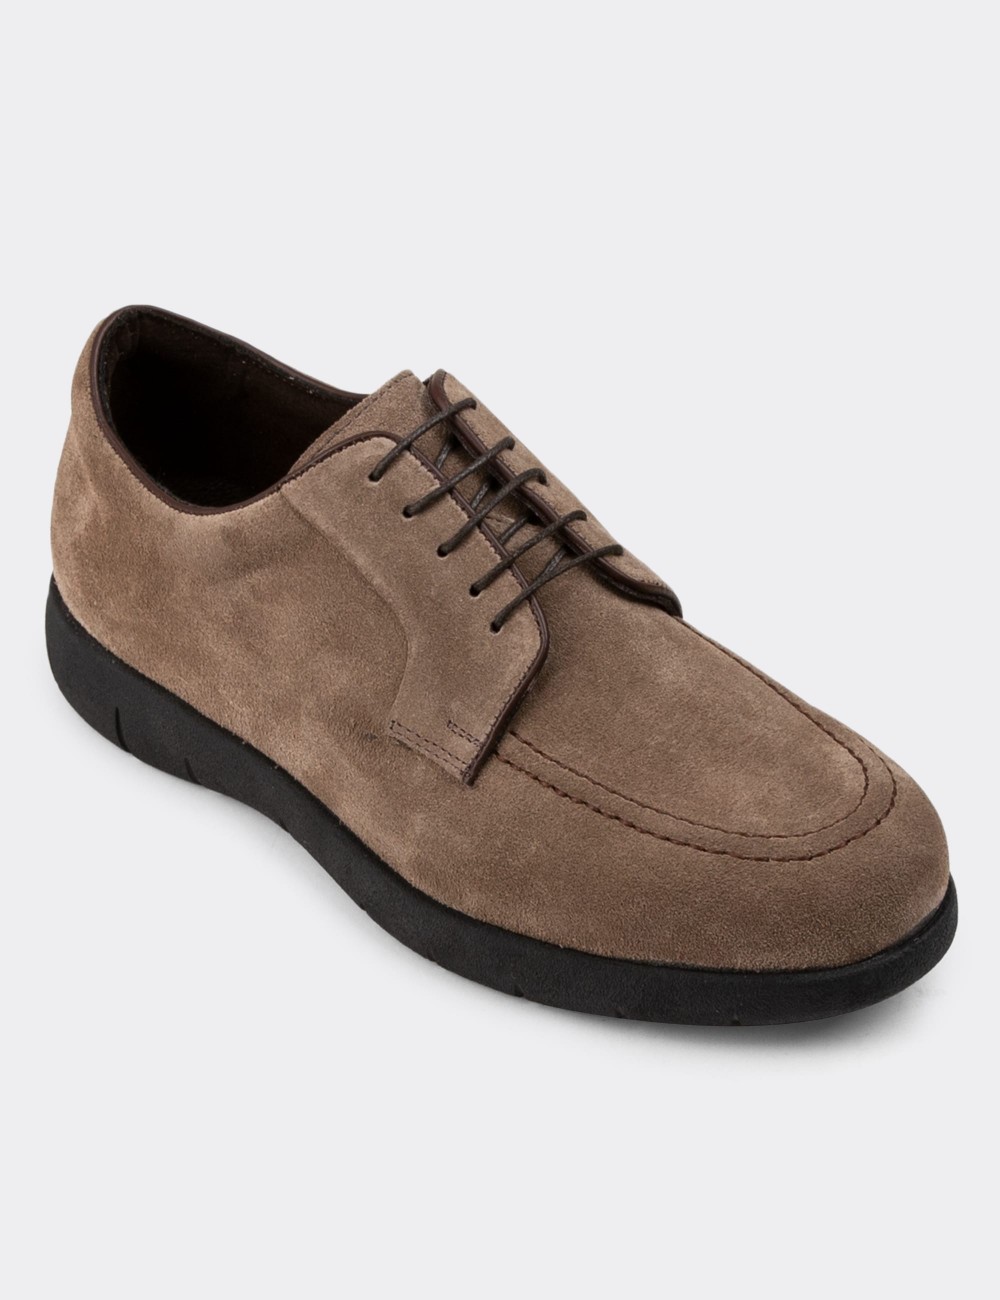 Sandstone Suede Leather Lace-up Shoes - 01930MVZNC01